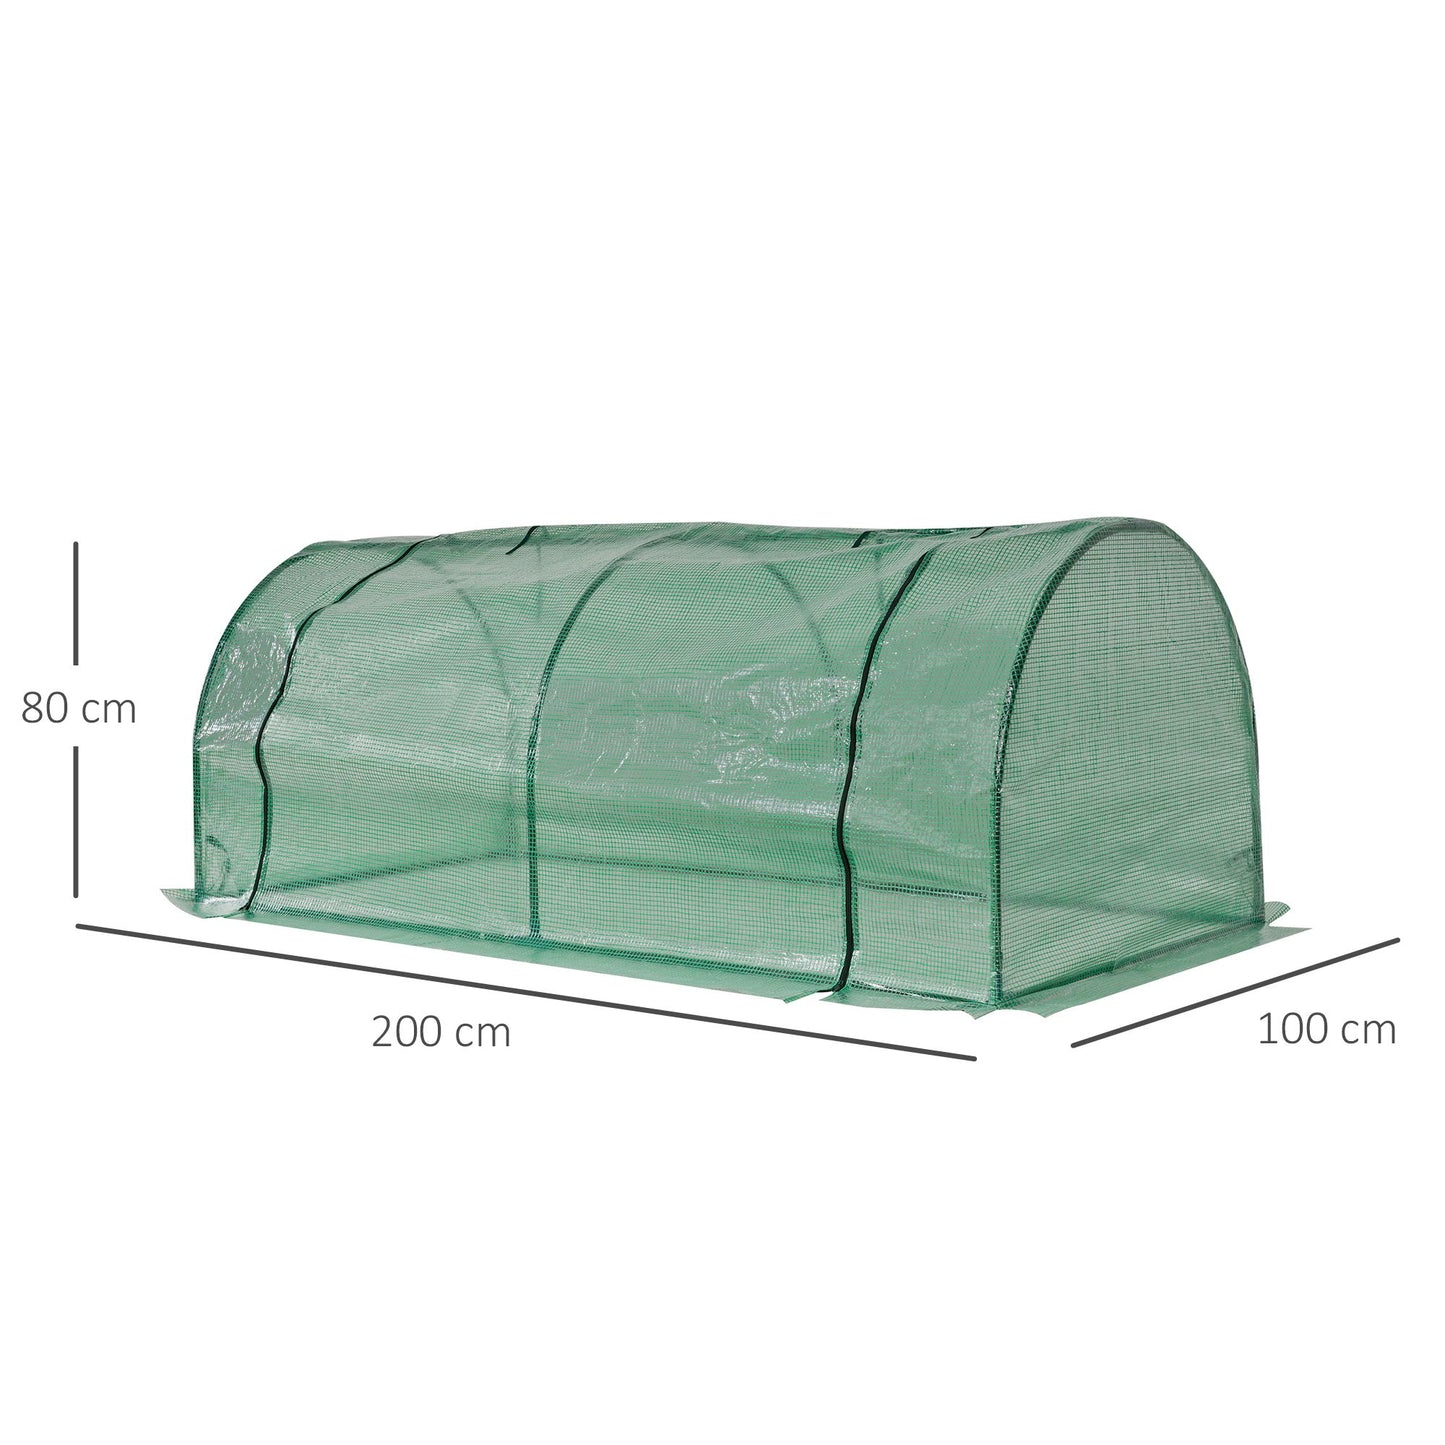 Outsunny Tunnel Greenhouse, Steel Frame Outdoor Grow House with PE Cover, Roll-up Door, Green, 200x100x80cm